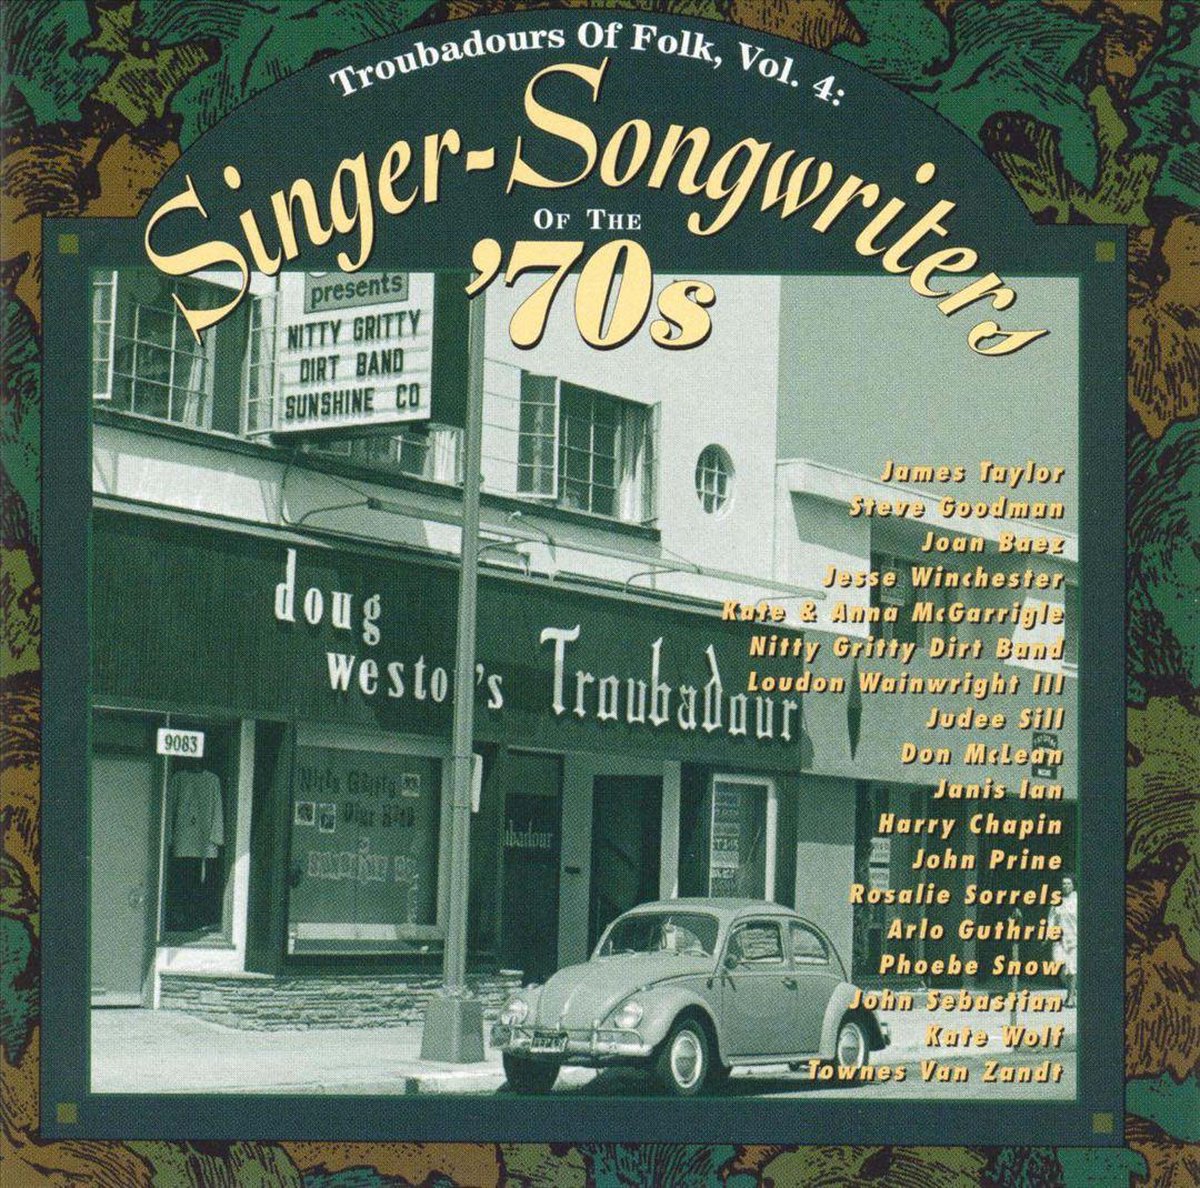 Troubadours of Folk, Vol. 4: Singer-Songwriters of the 1970's - various artists